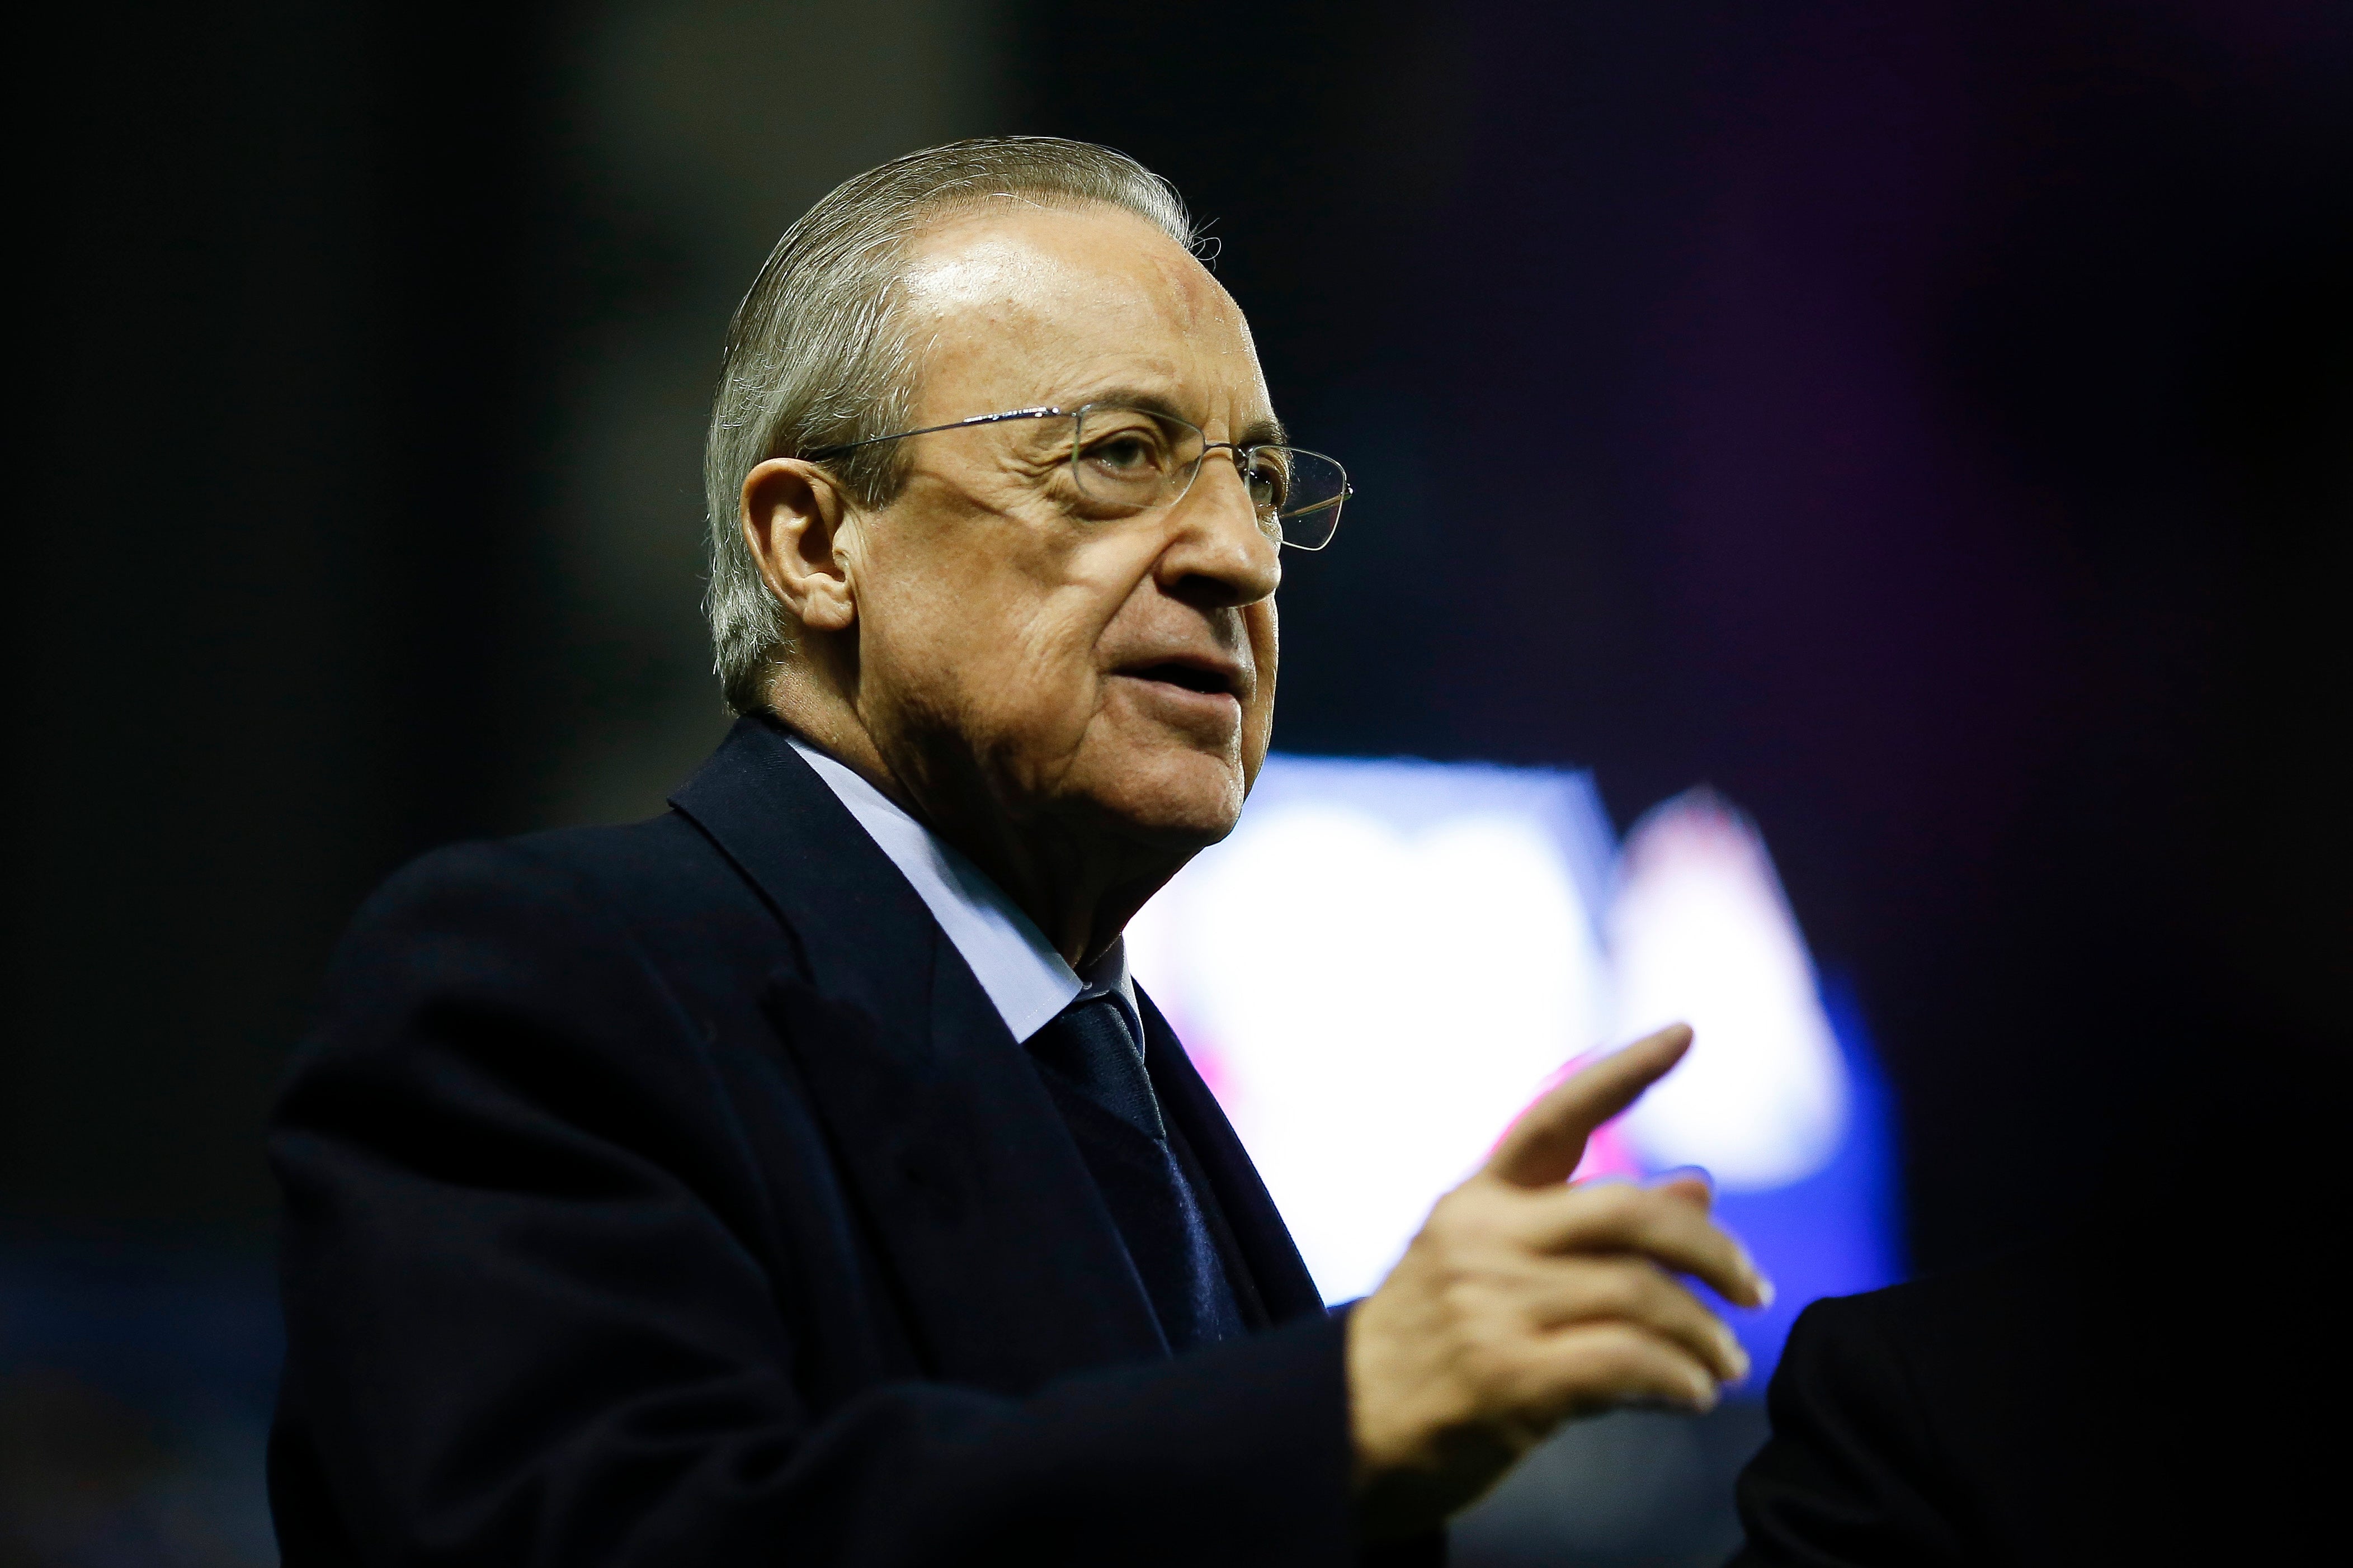 Real Madrid president Florentino Perez says he has tried to “save football” with the Super League proposals